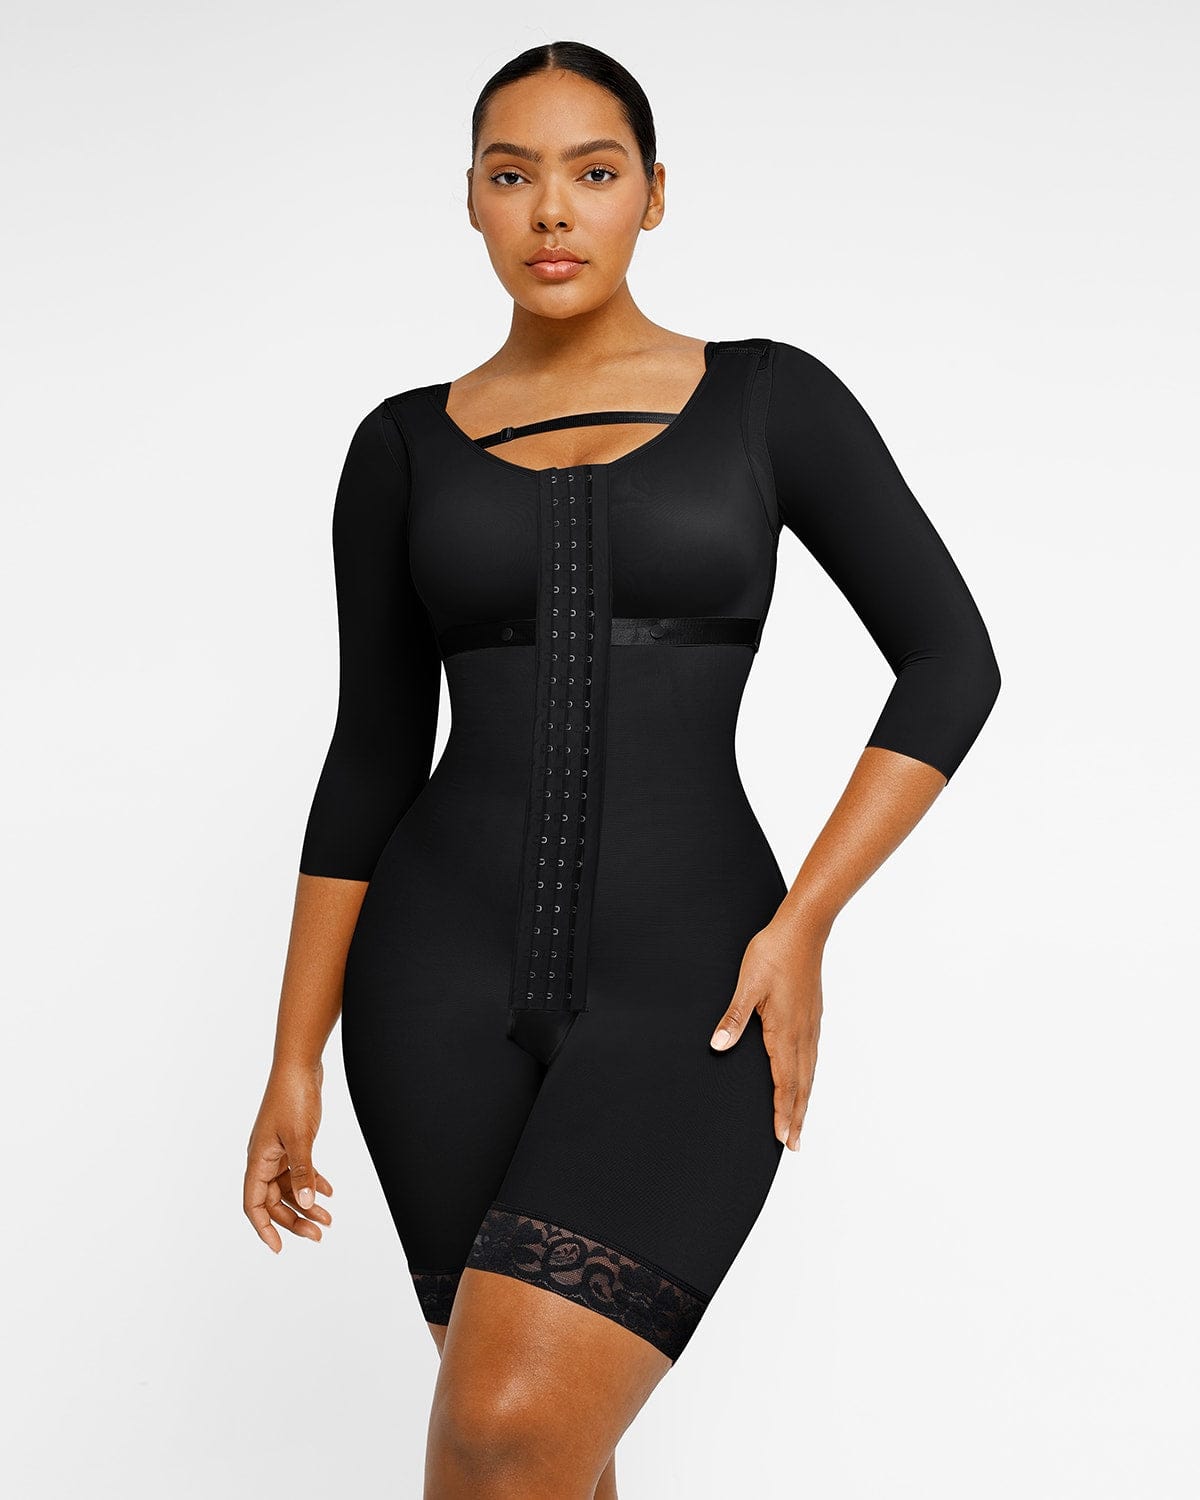 Shapellx Arm Shapers to Makes Your Arm Slimmer